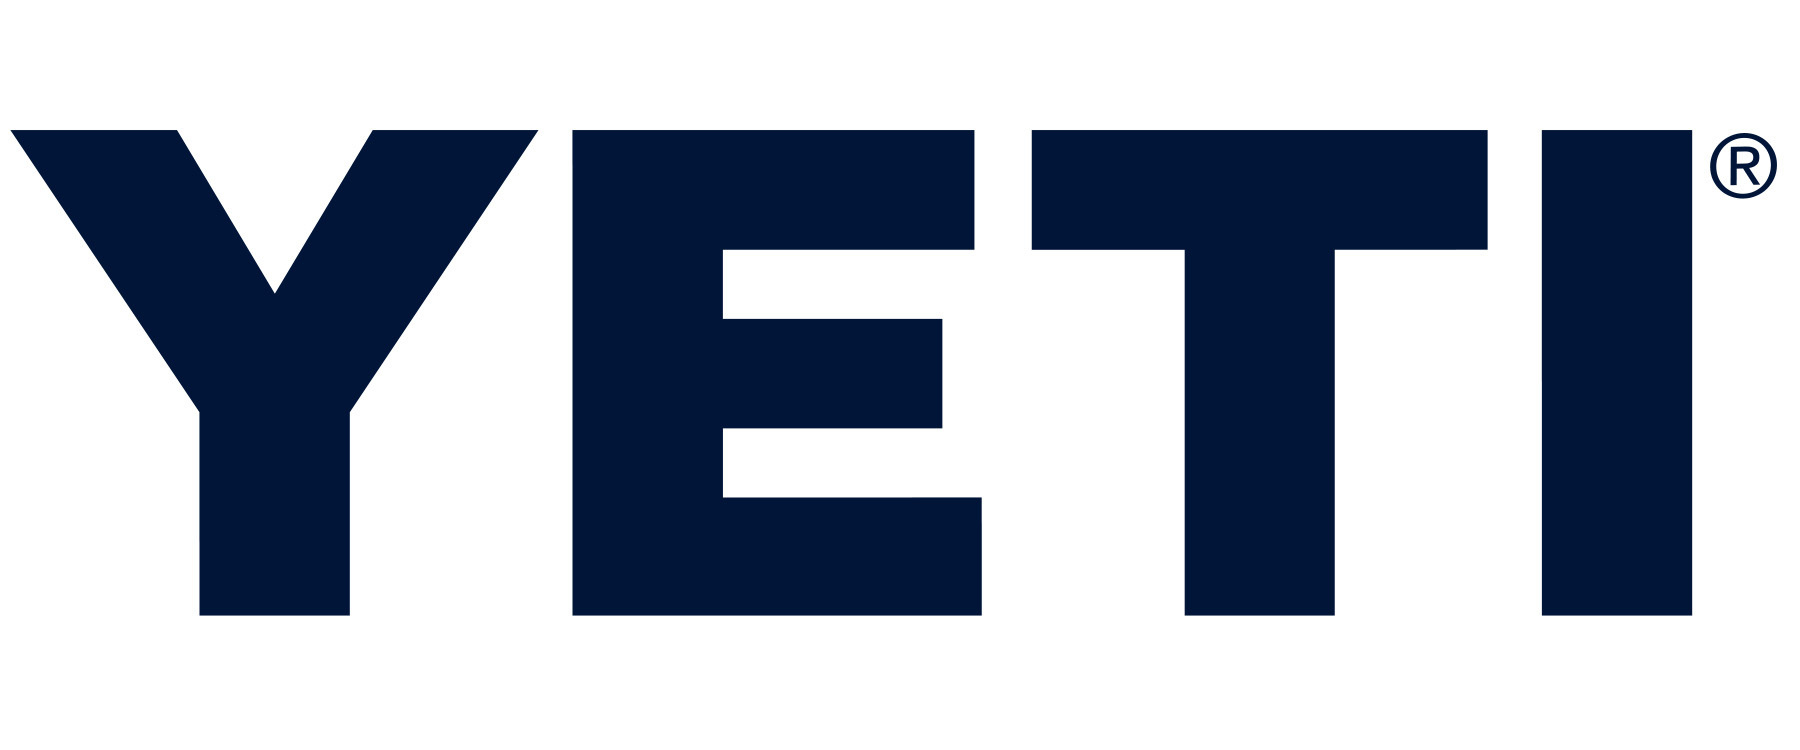 YETI Products For Everyday Adventures